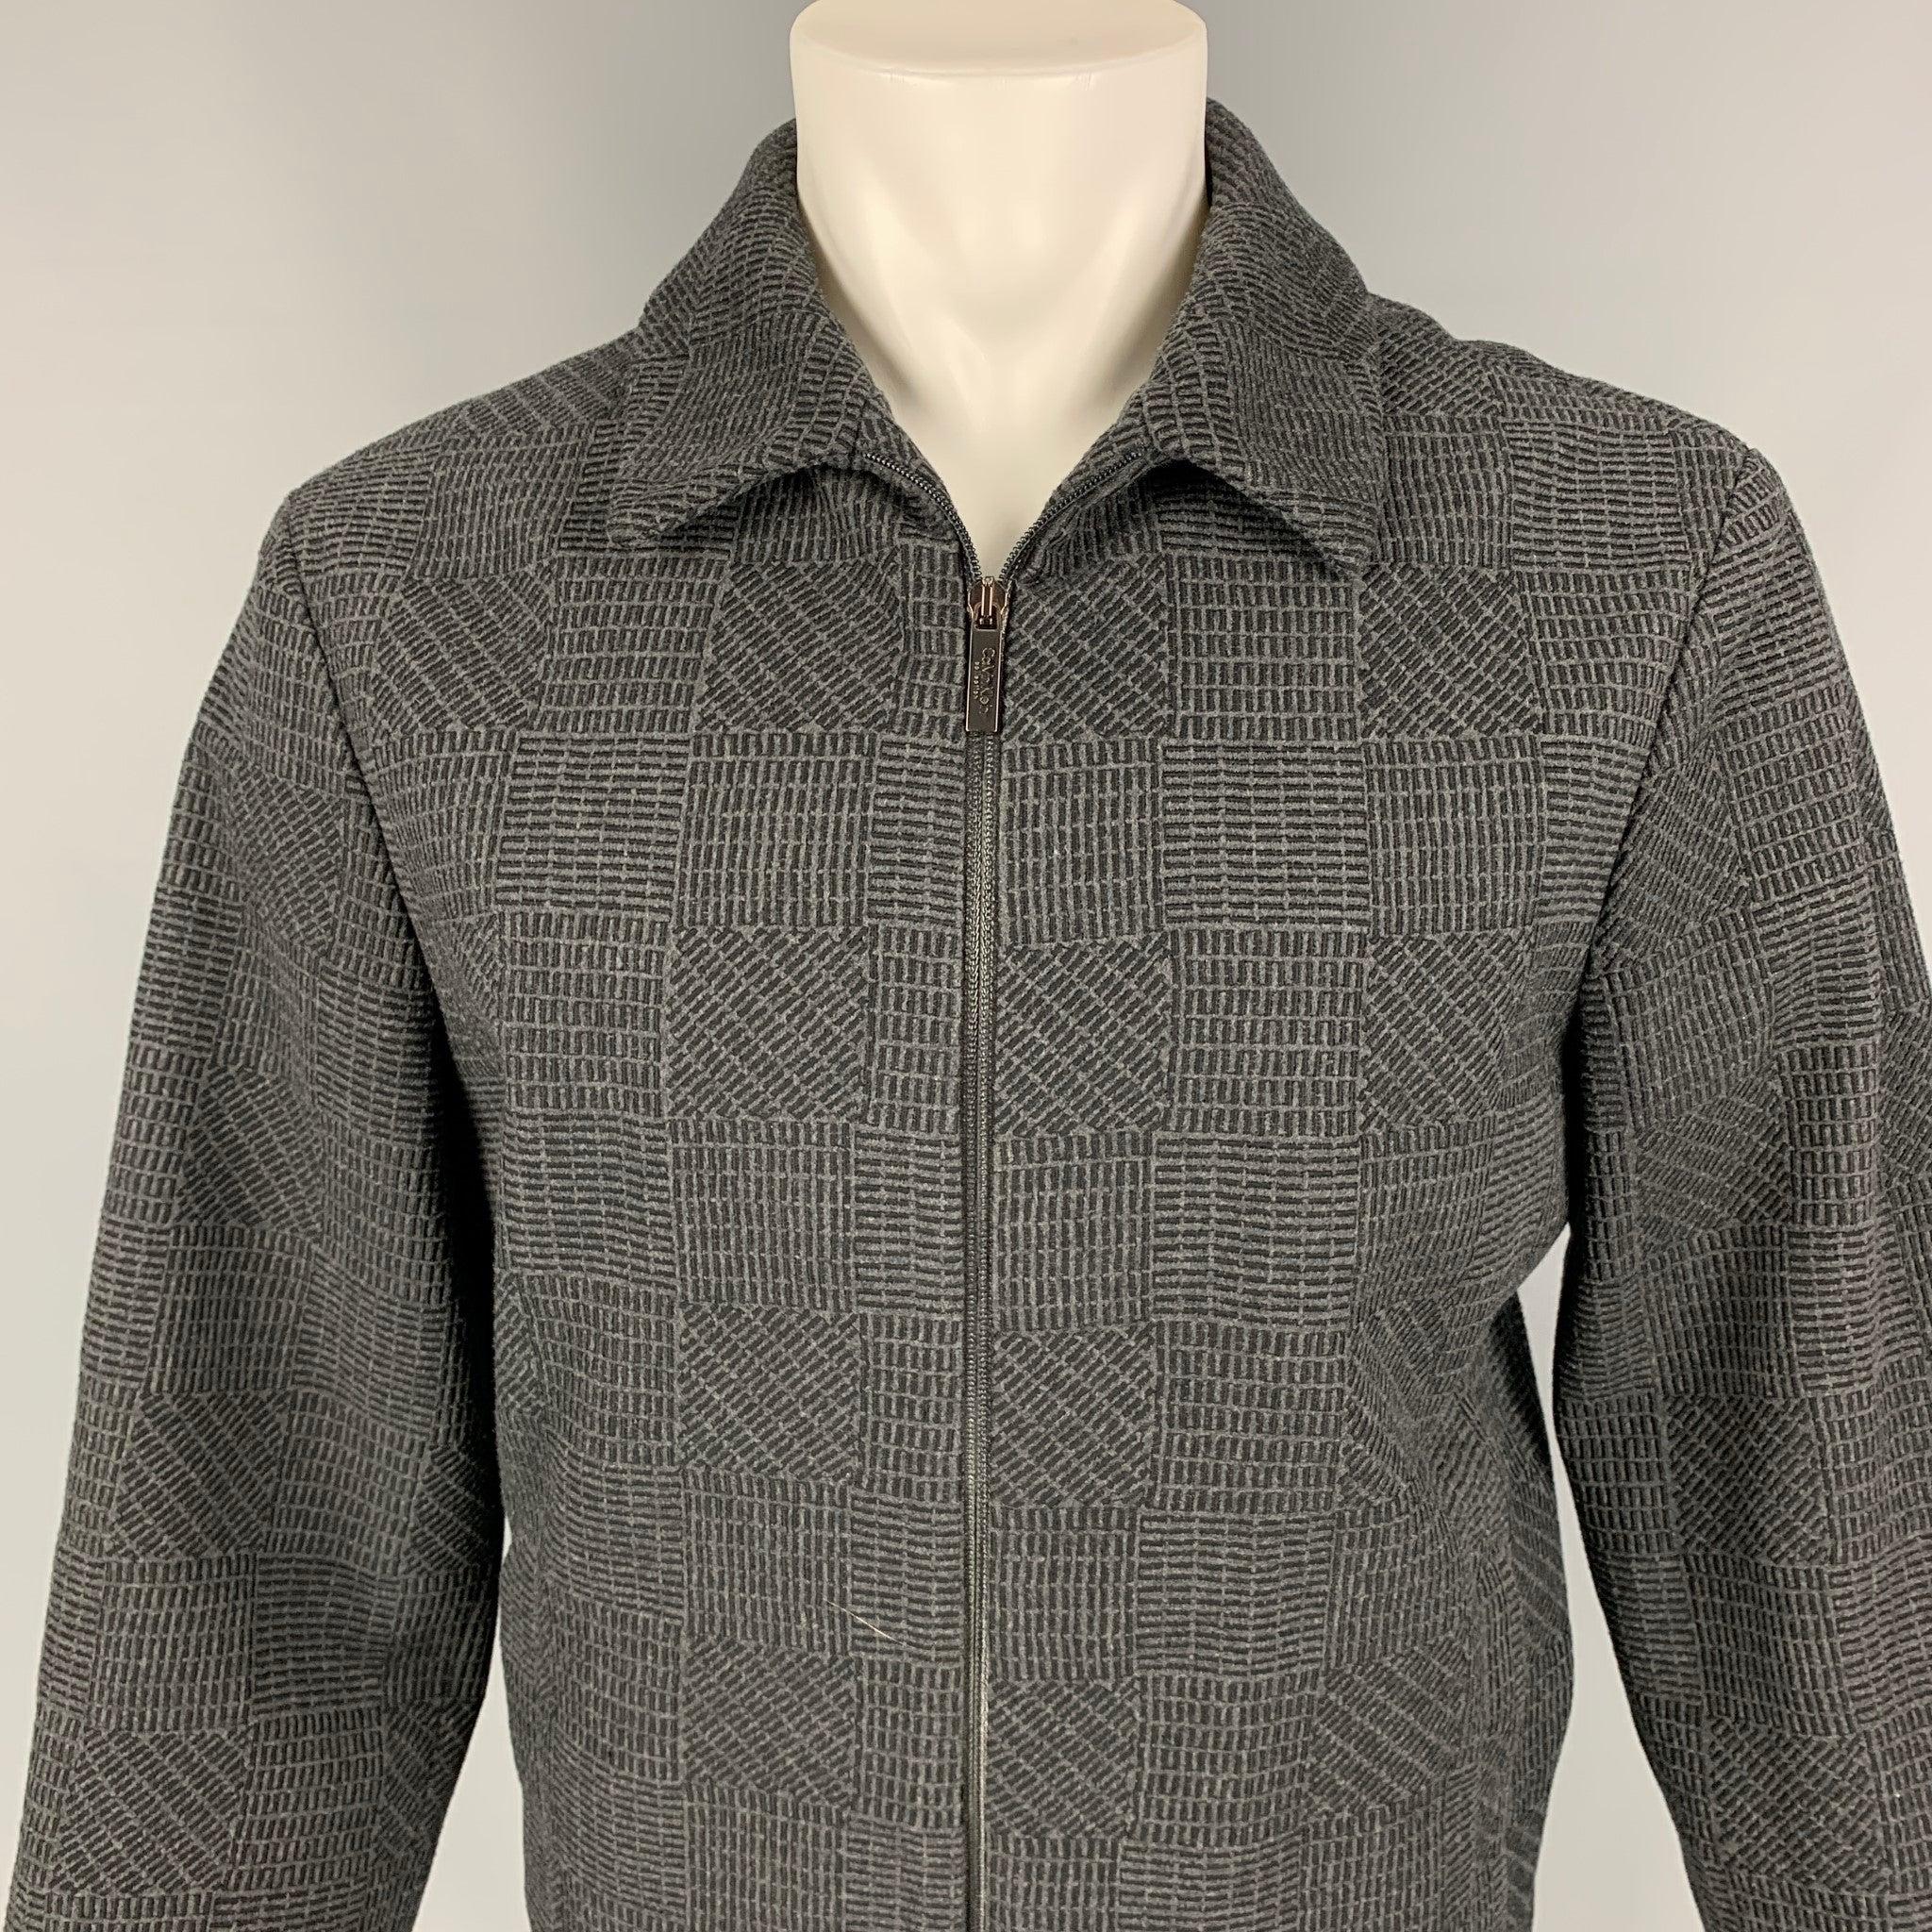 CALVIN KLEIN COLLECTION jacket comes in a charcoal & black textured wool / cashmere with a full liner featuring a spread collar, slit pockets, and a full zip up closure. Made in Italy.
Excellent
Pre-Owned Condition.  

Marked:   48 

Measurements: 
